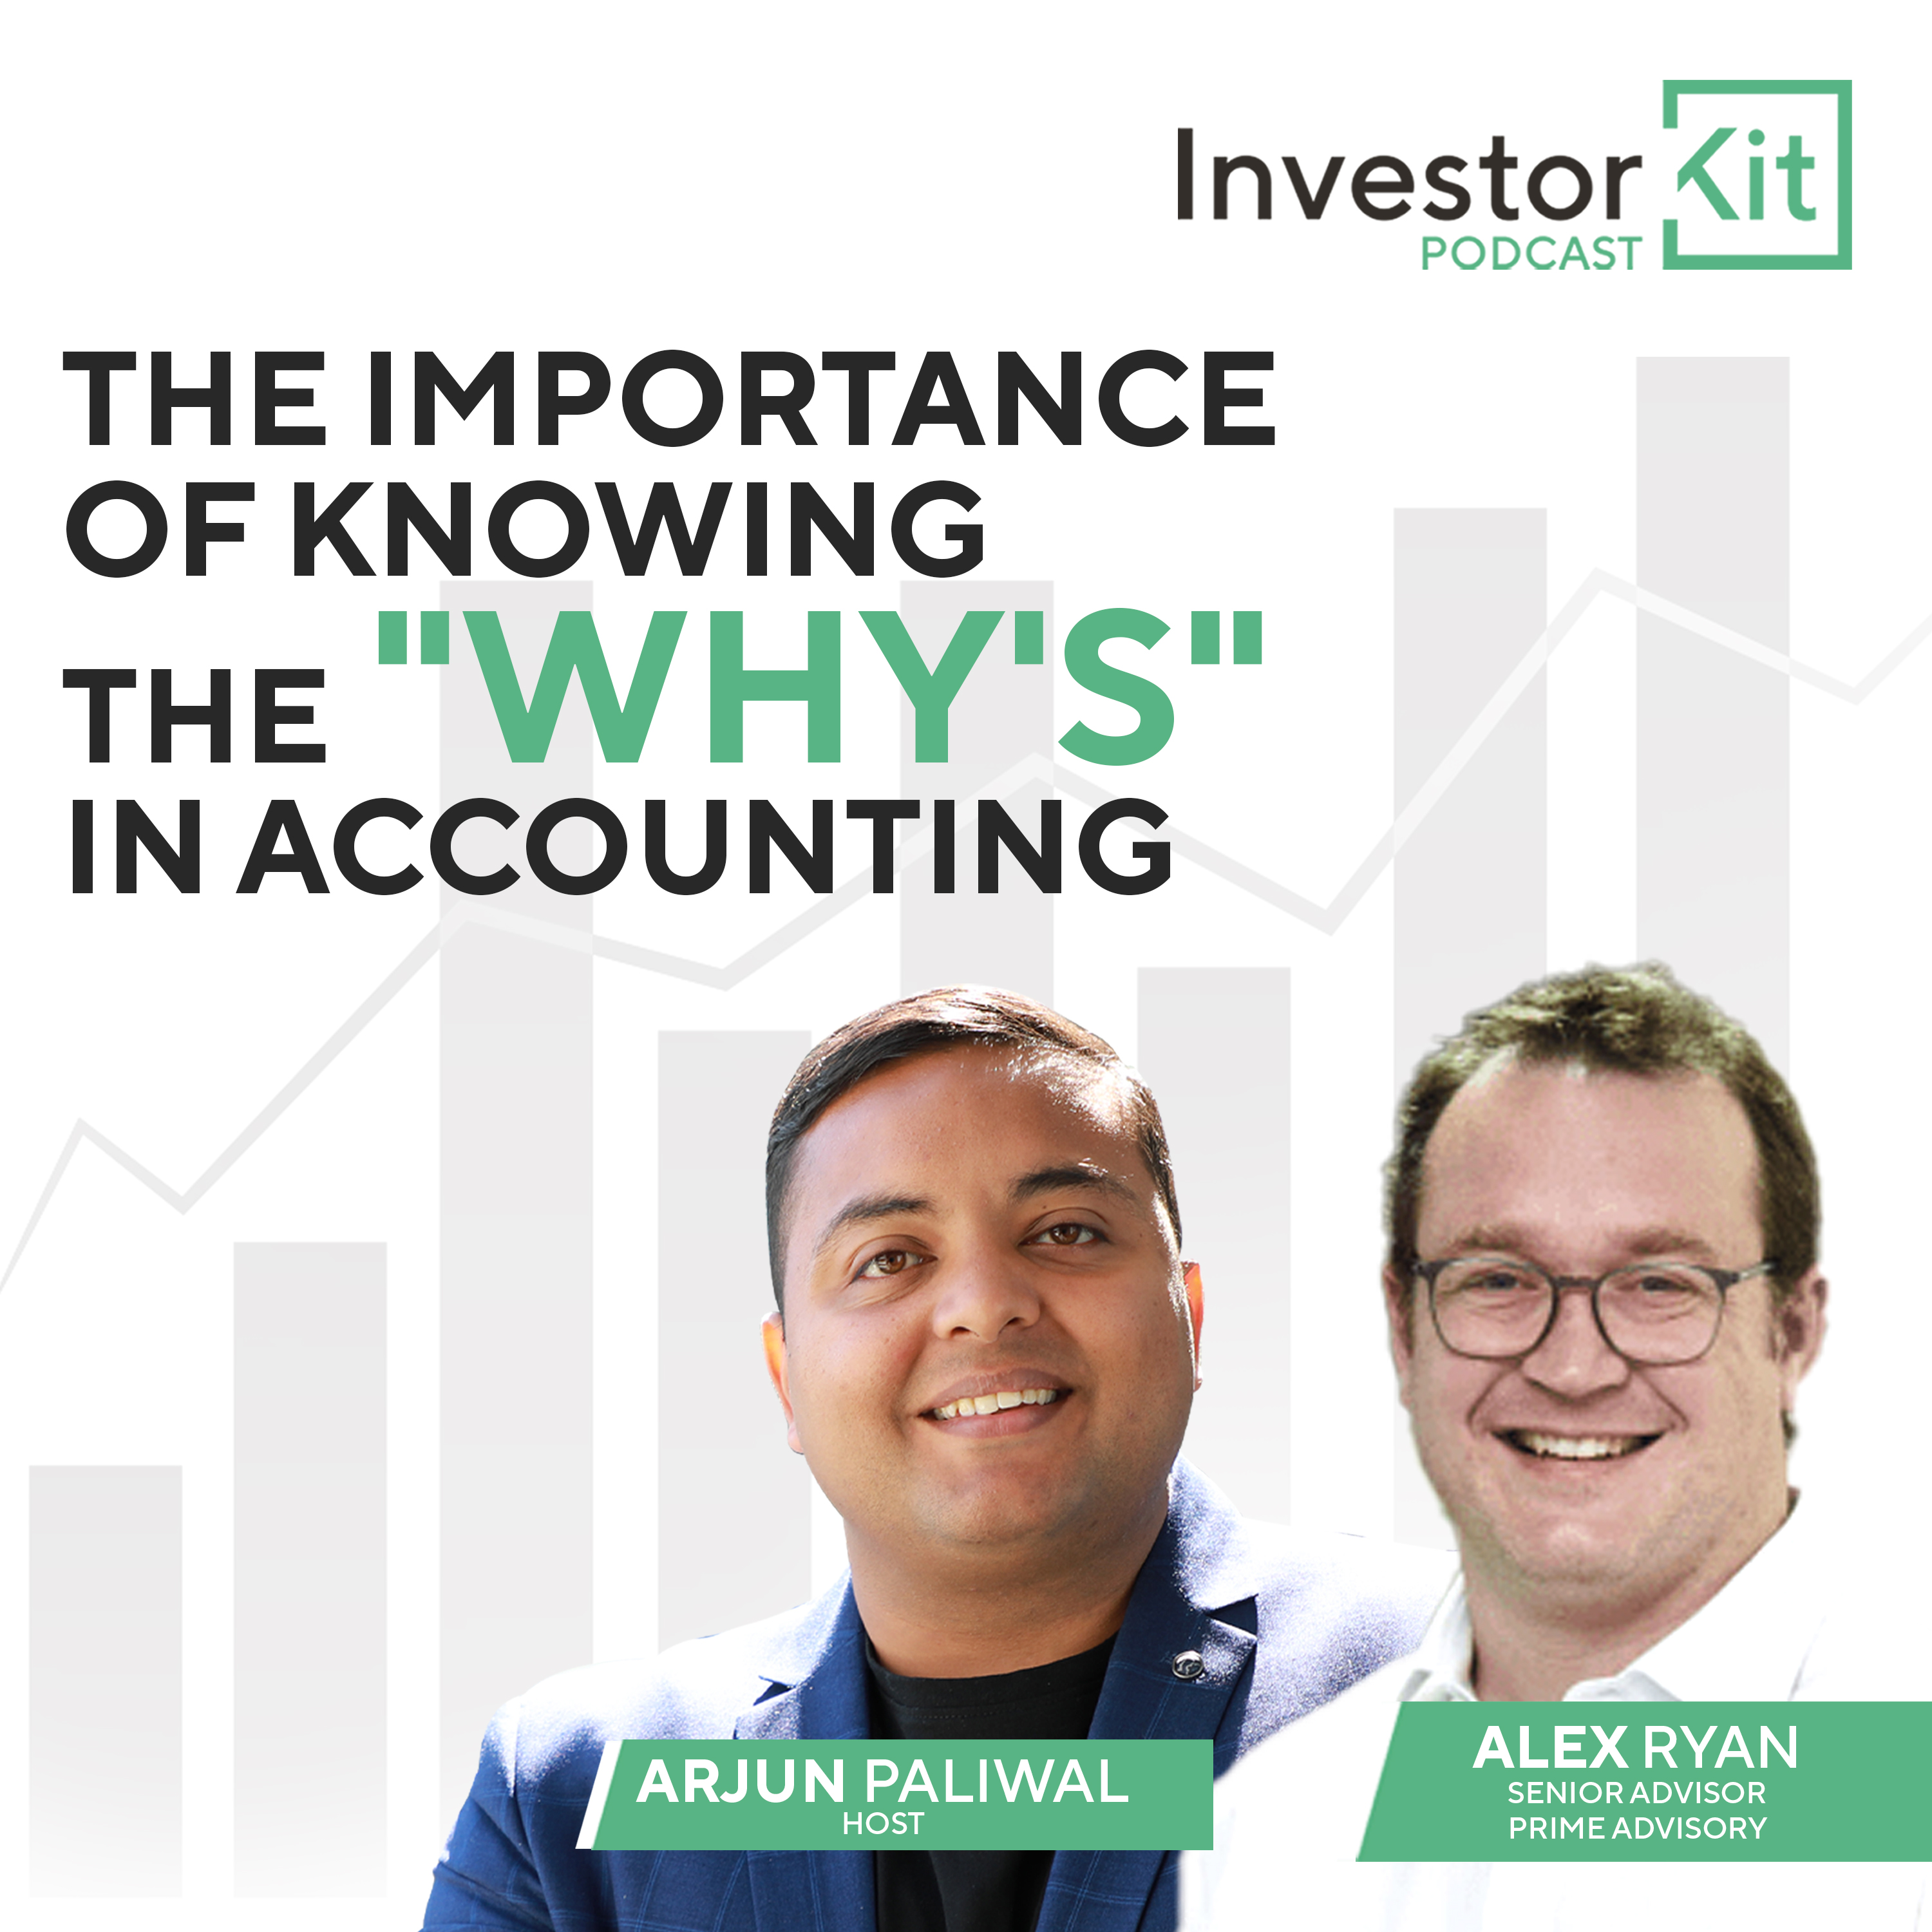 The Importance of Knowing the "Why's" in Accounting